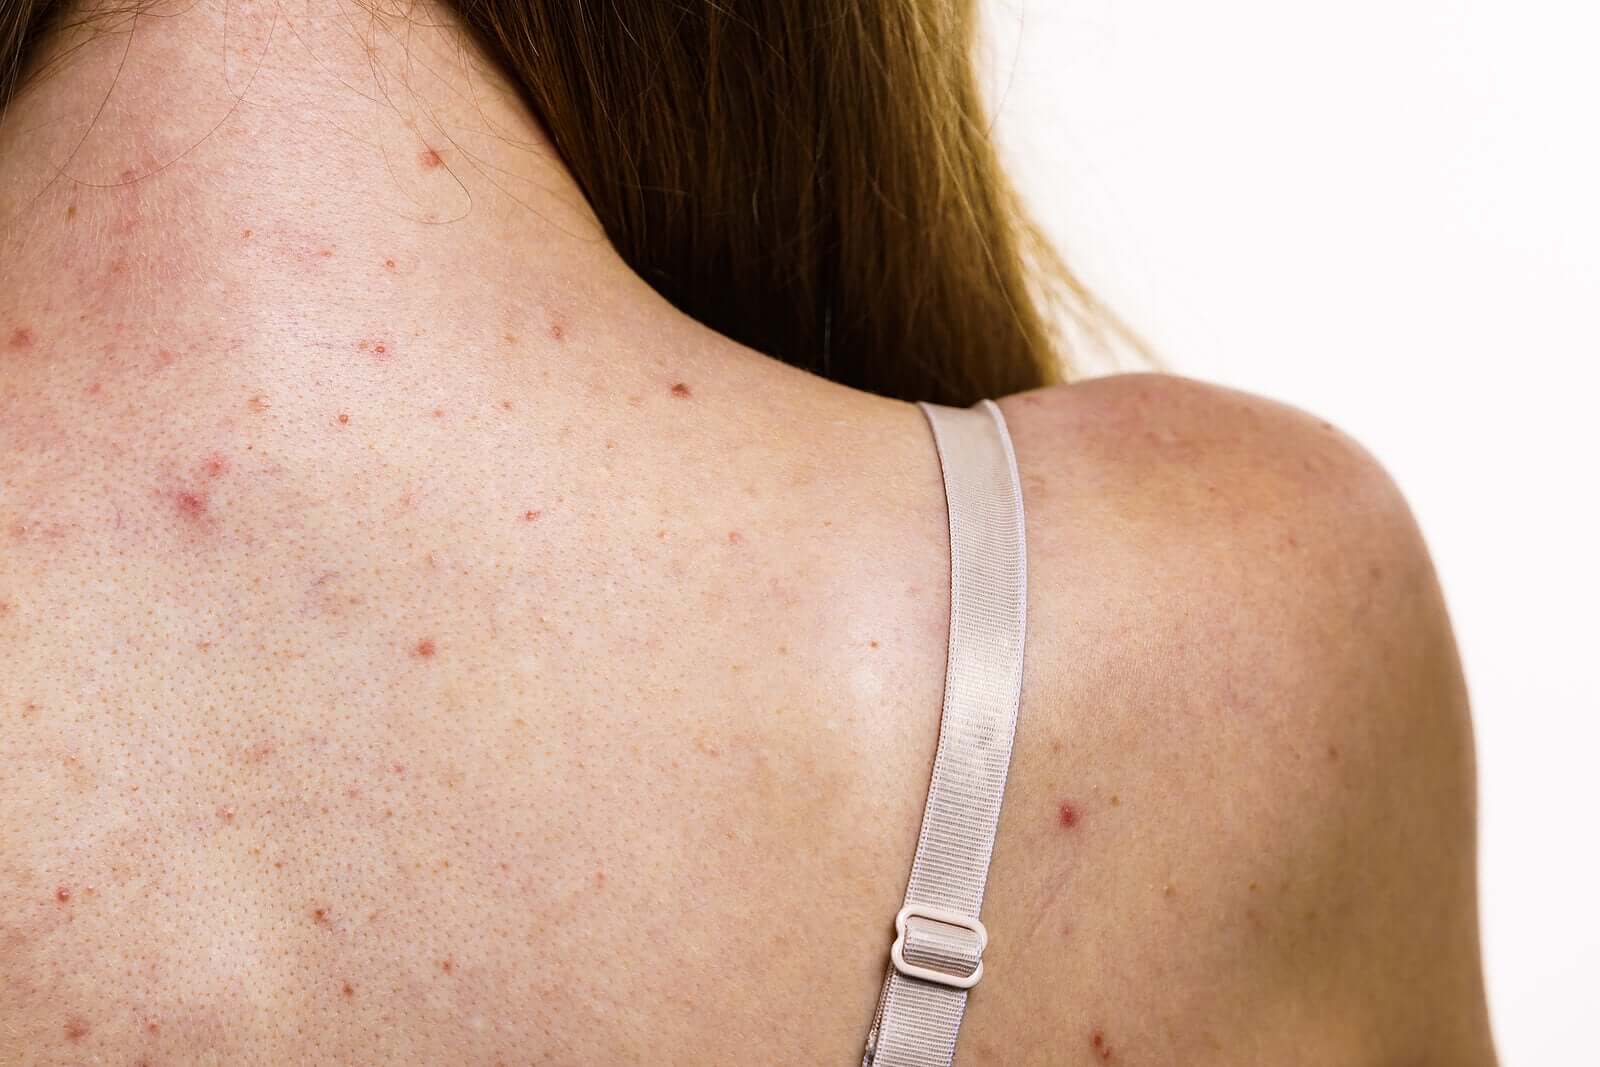 A woman with acne on her back.